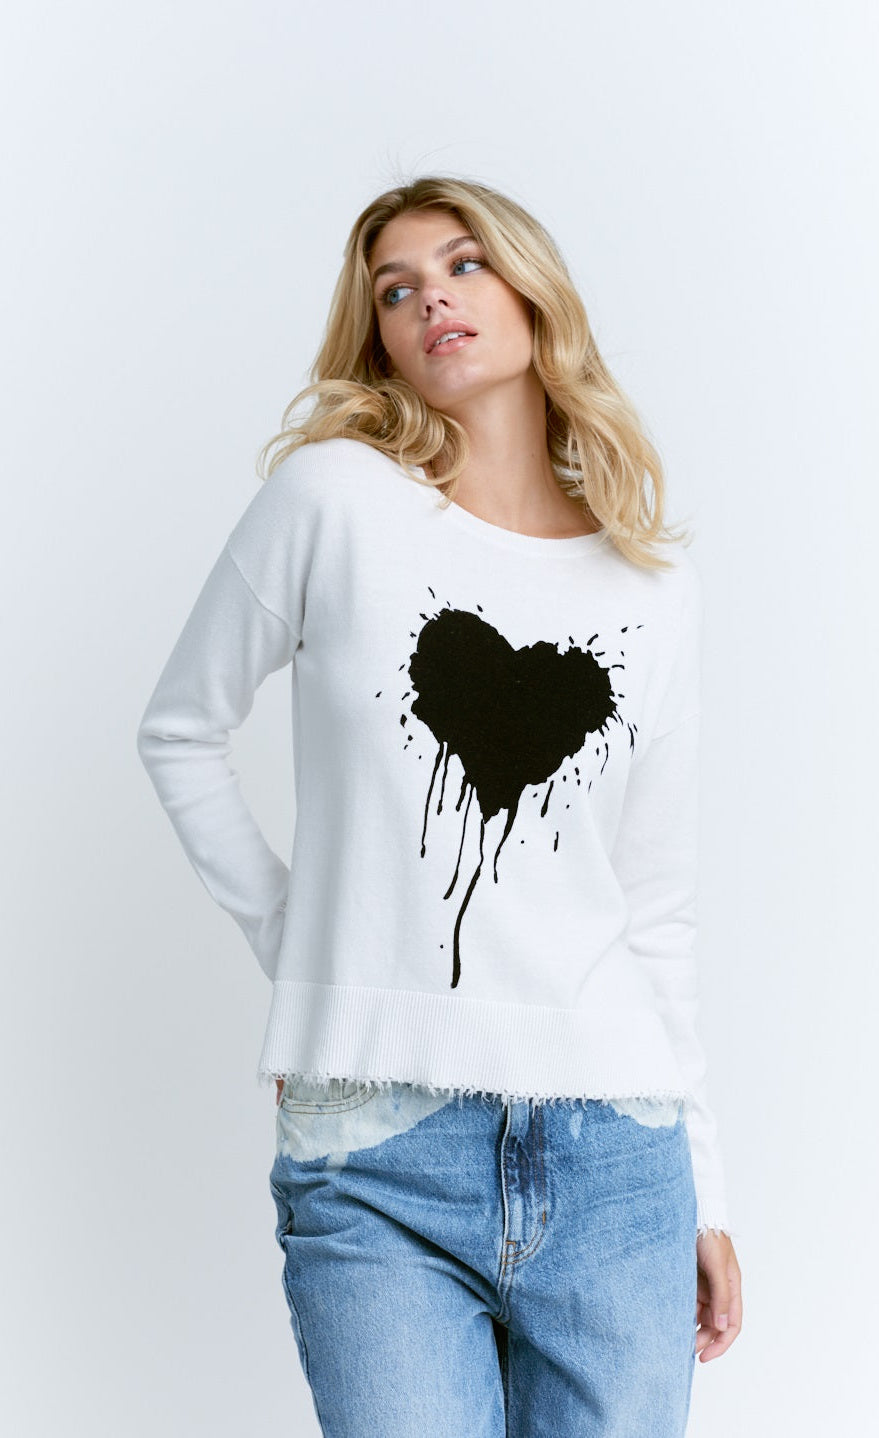 Front top half view of a woman wearing the lisa todd tainted love sweater. This sweater is white with a black dripping heart on the front.